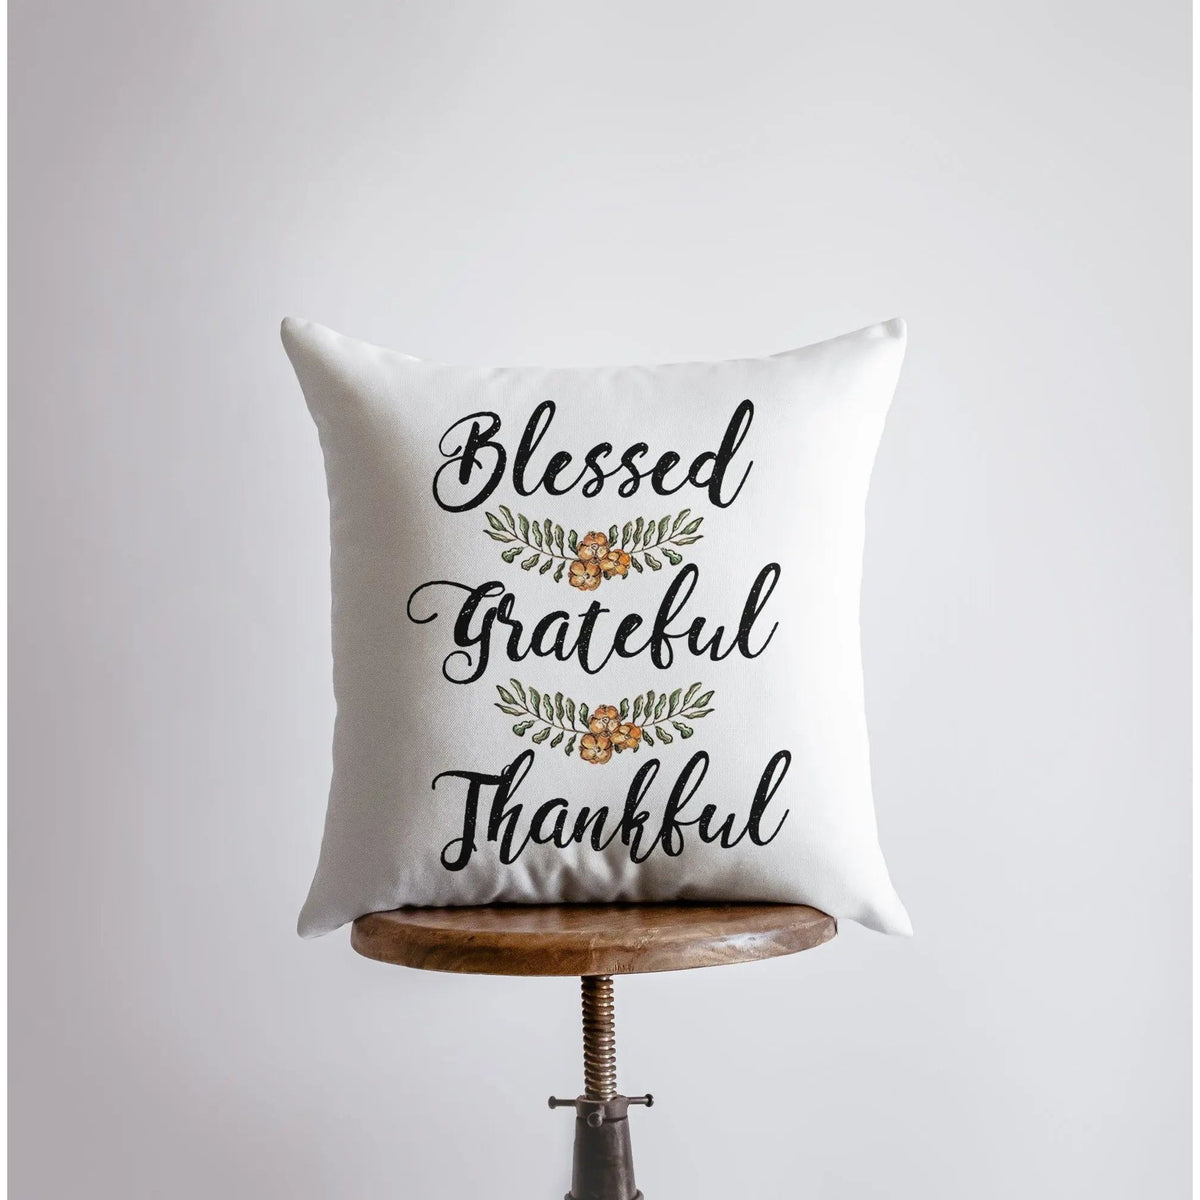 Blessed Grateful Thankful | Pillow Cover | Fall Decor | Fall Decoration | Thanksgiving Decor